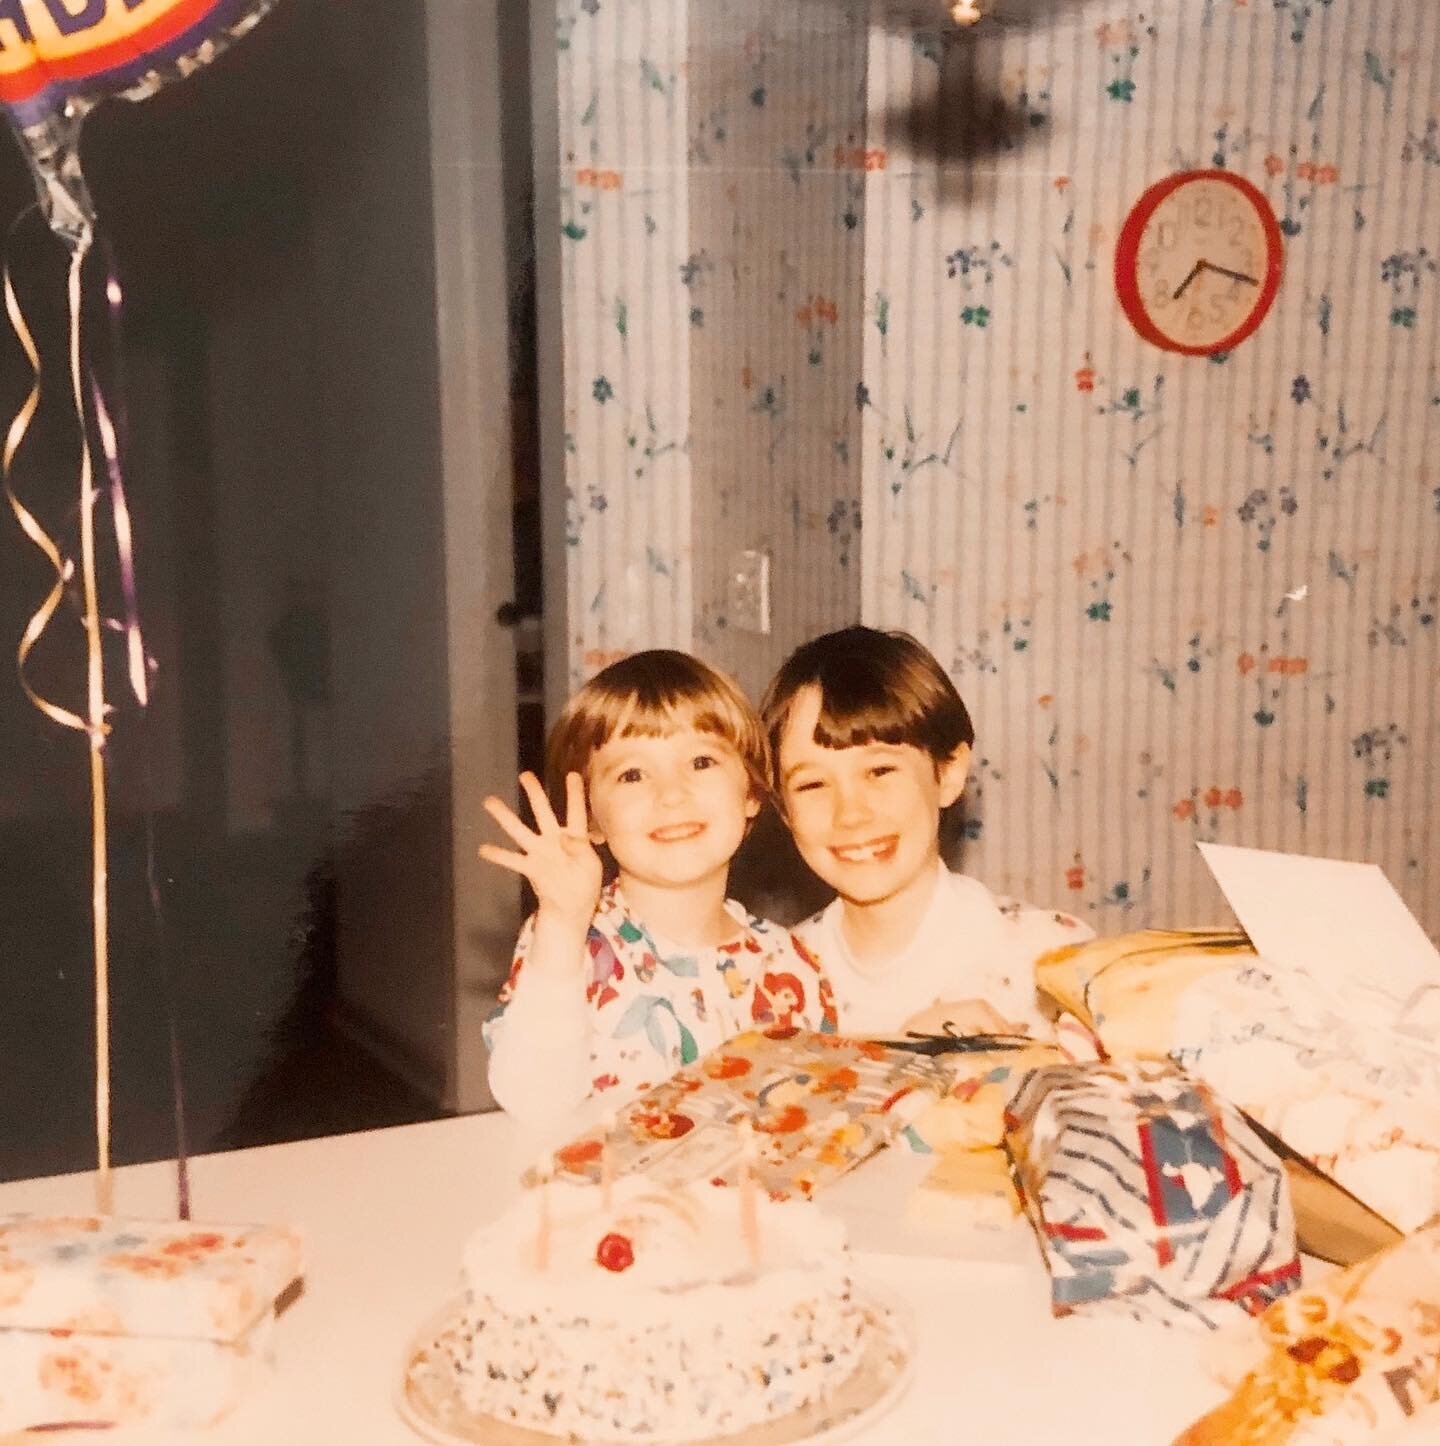 happy birthday to you, @maretseitz. 

it&rsquo;s been 30 years since this birthday in chicago - and one million sister memories from around the world, literally.

i&rsquo;m here &lsquo;four&rsquo; all the russell brand lookalikes in northern ireland,